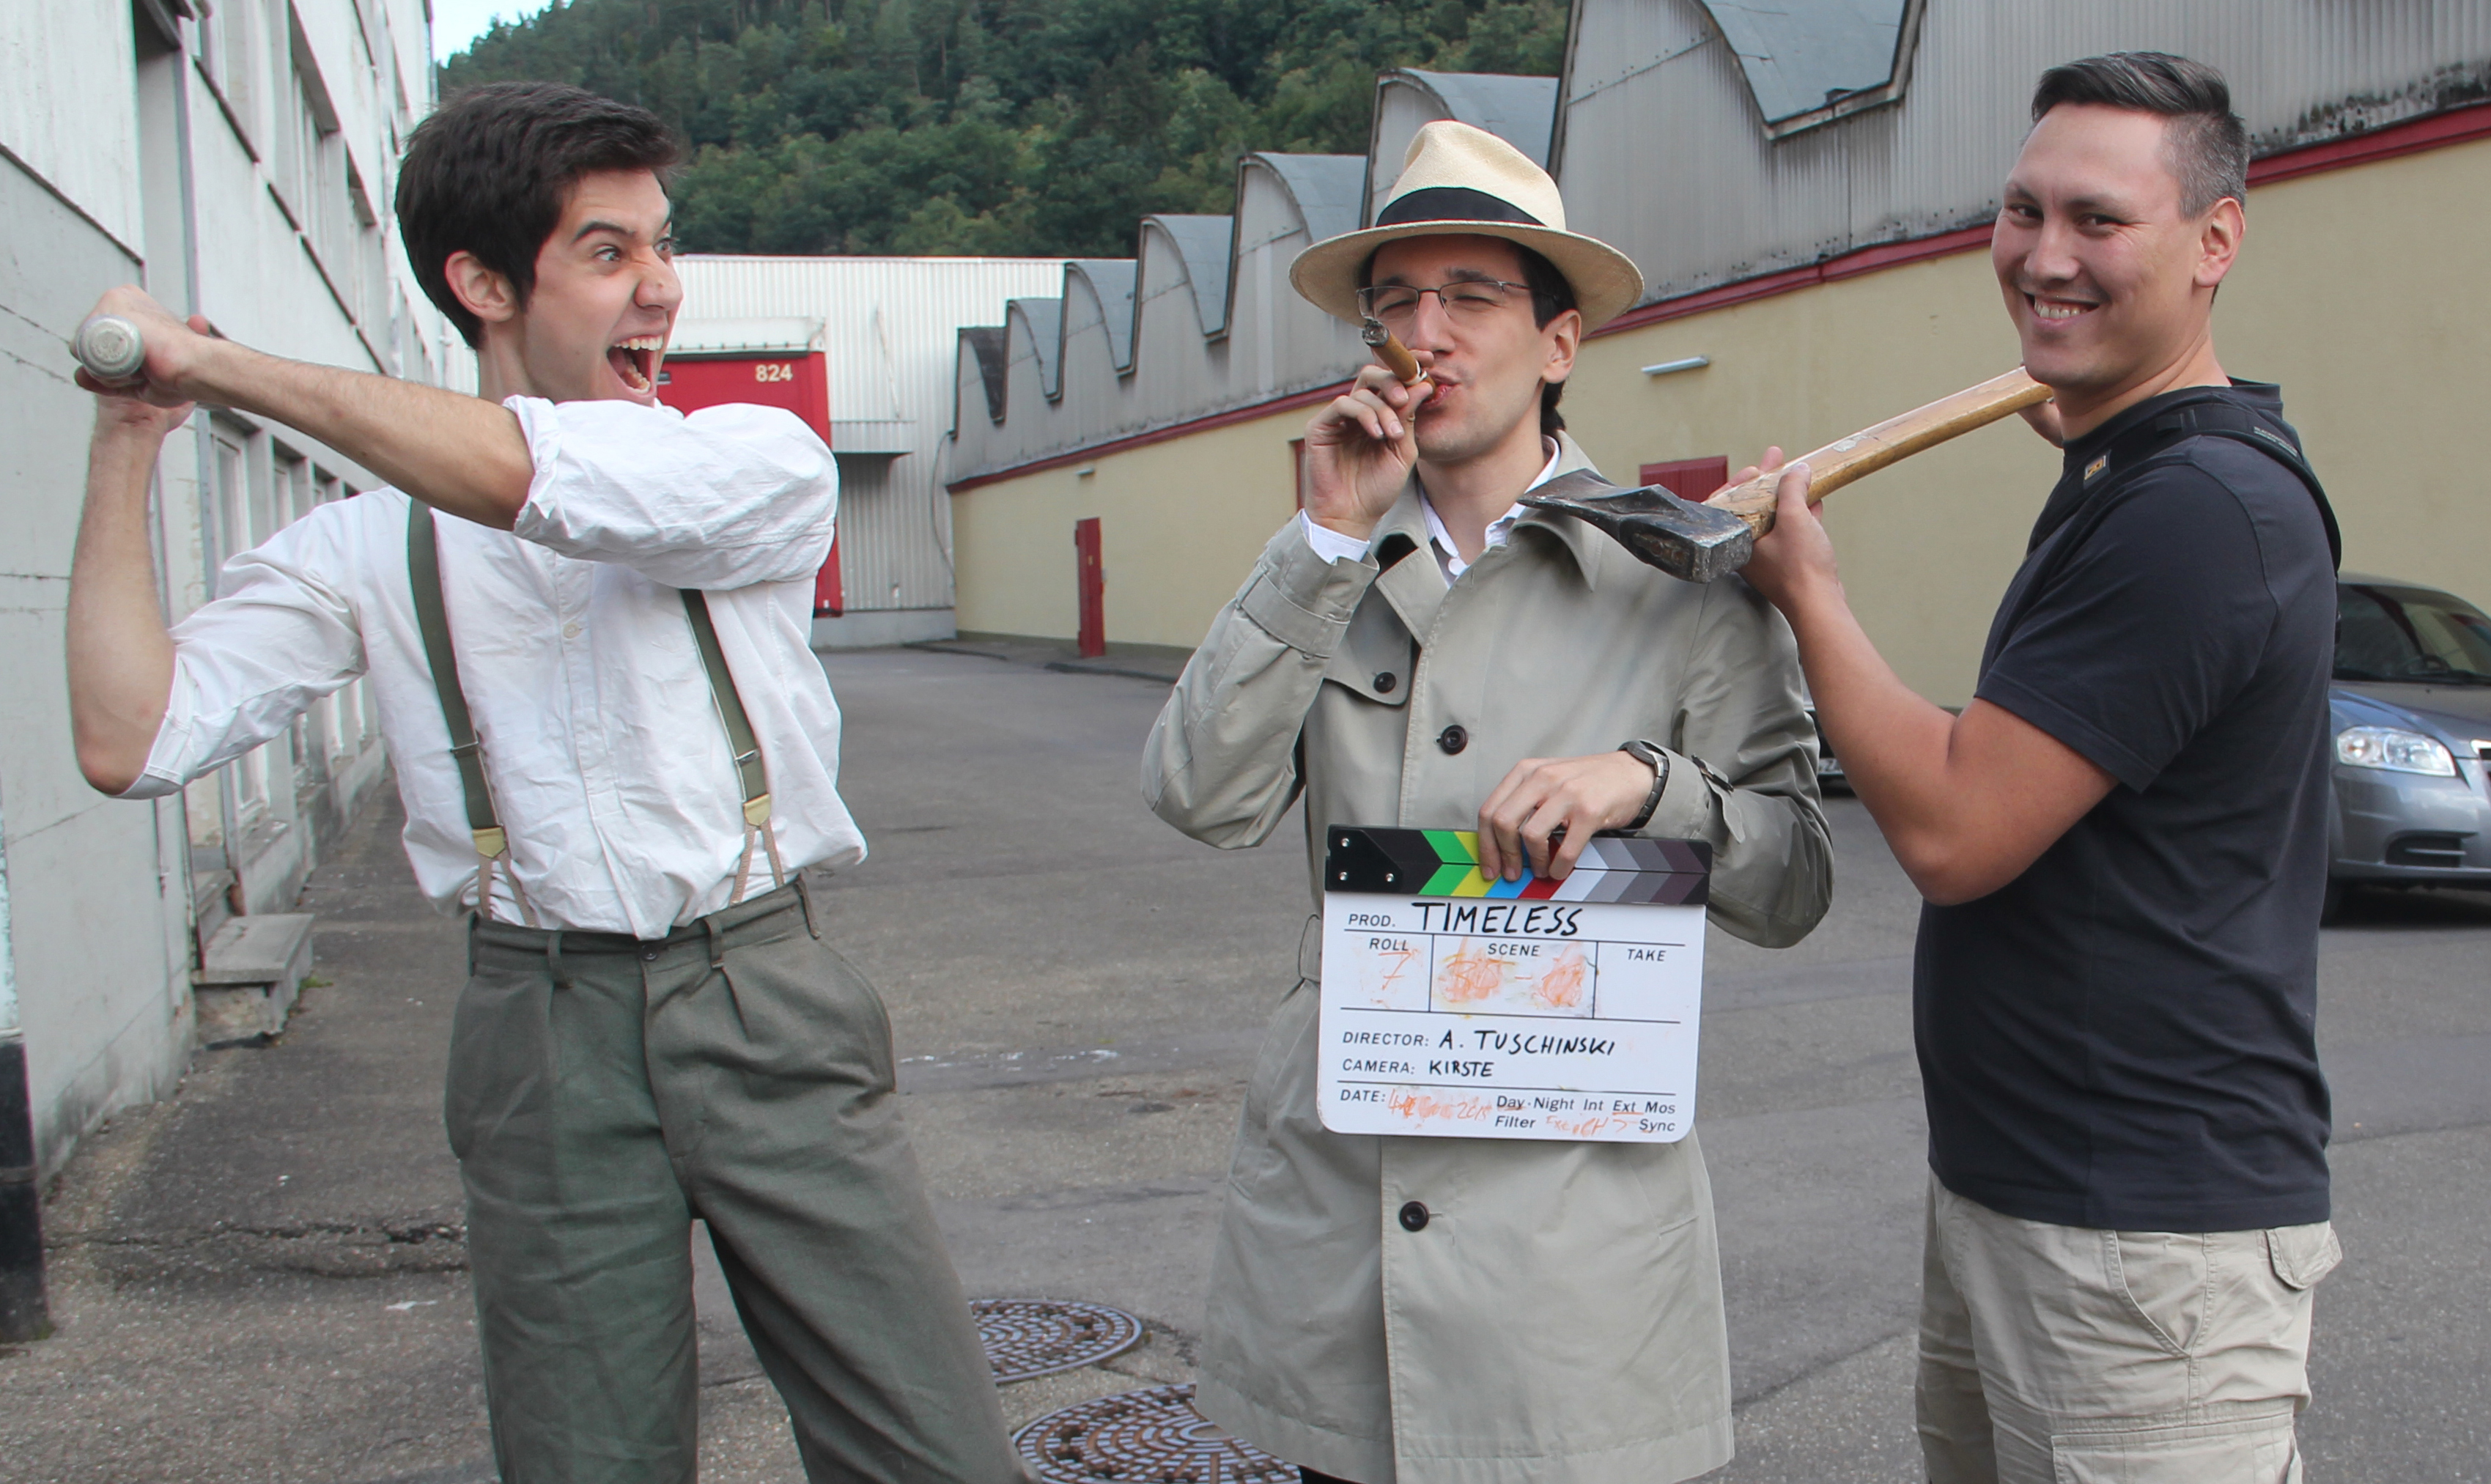 Joking around during a break on the set of Timeless, together with Matthias Kirste and Sebastian B.